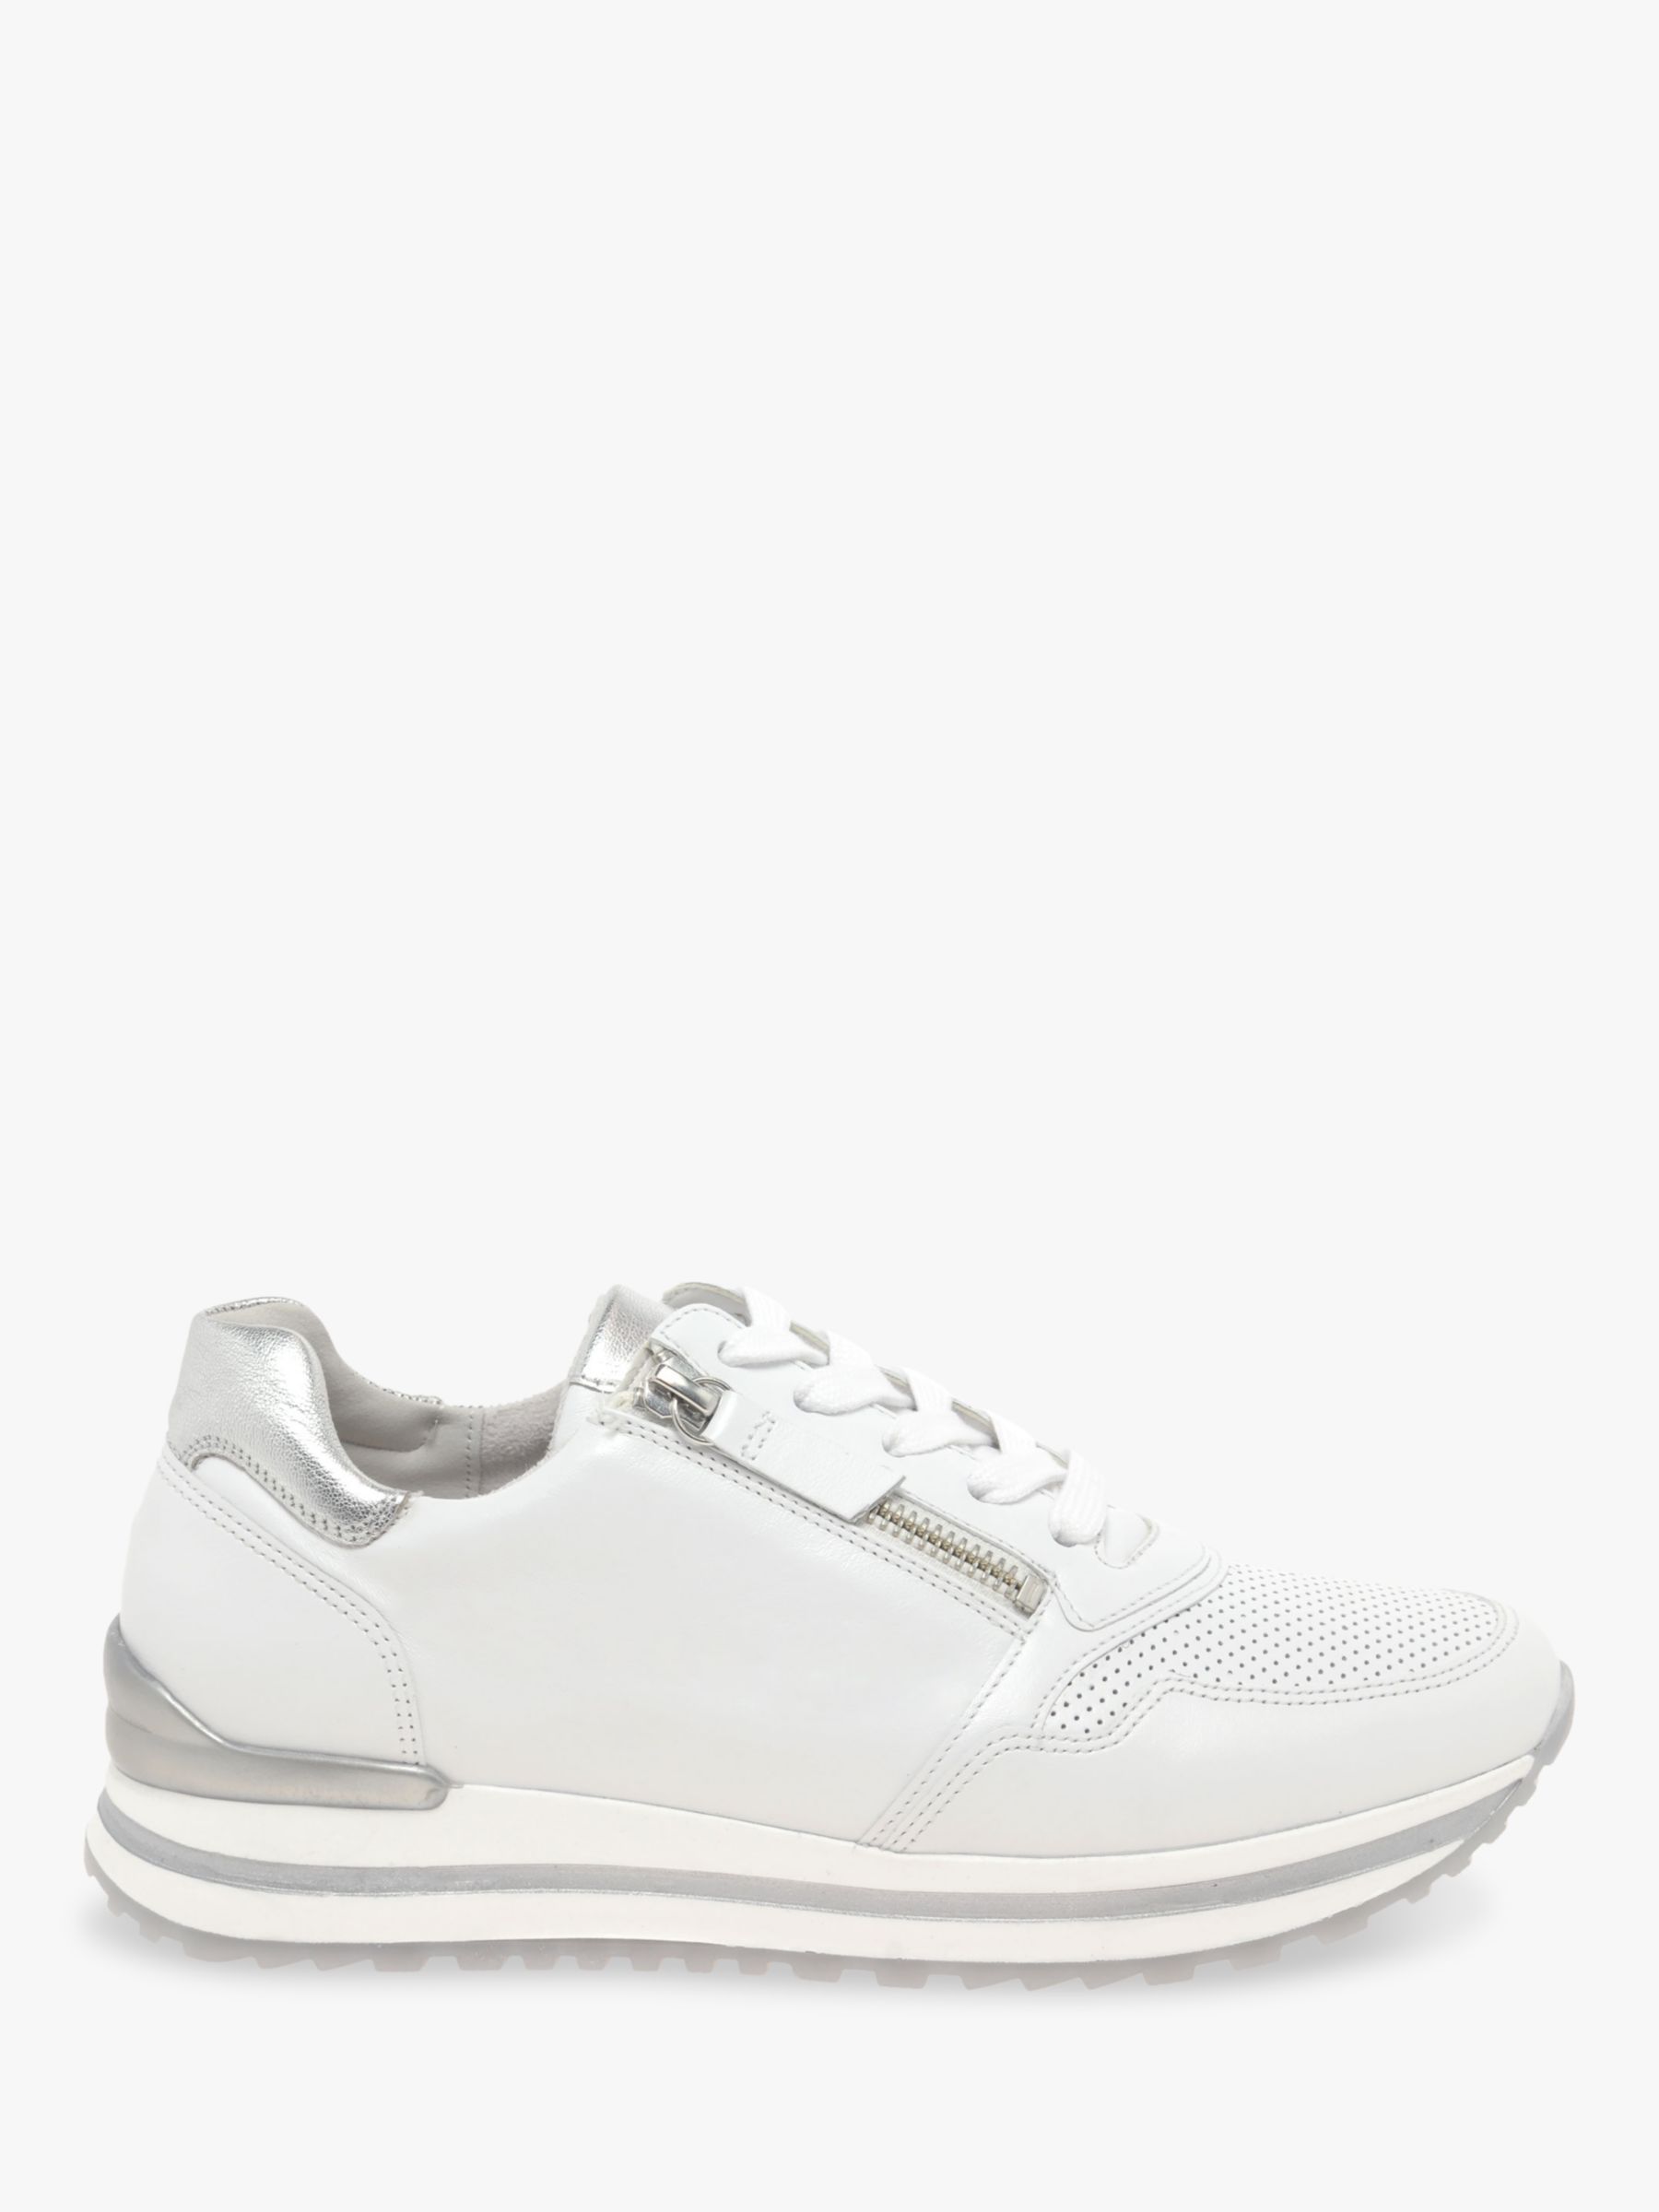 Gabor Nulon Extra Wide Fit Nubuck Leather Trainers, White at John Lewis ...